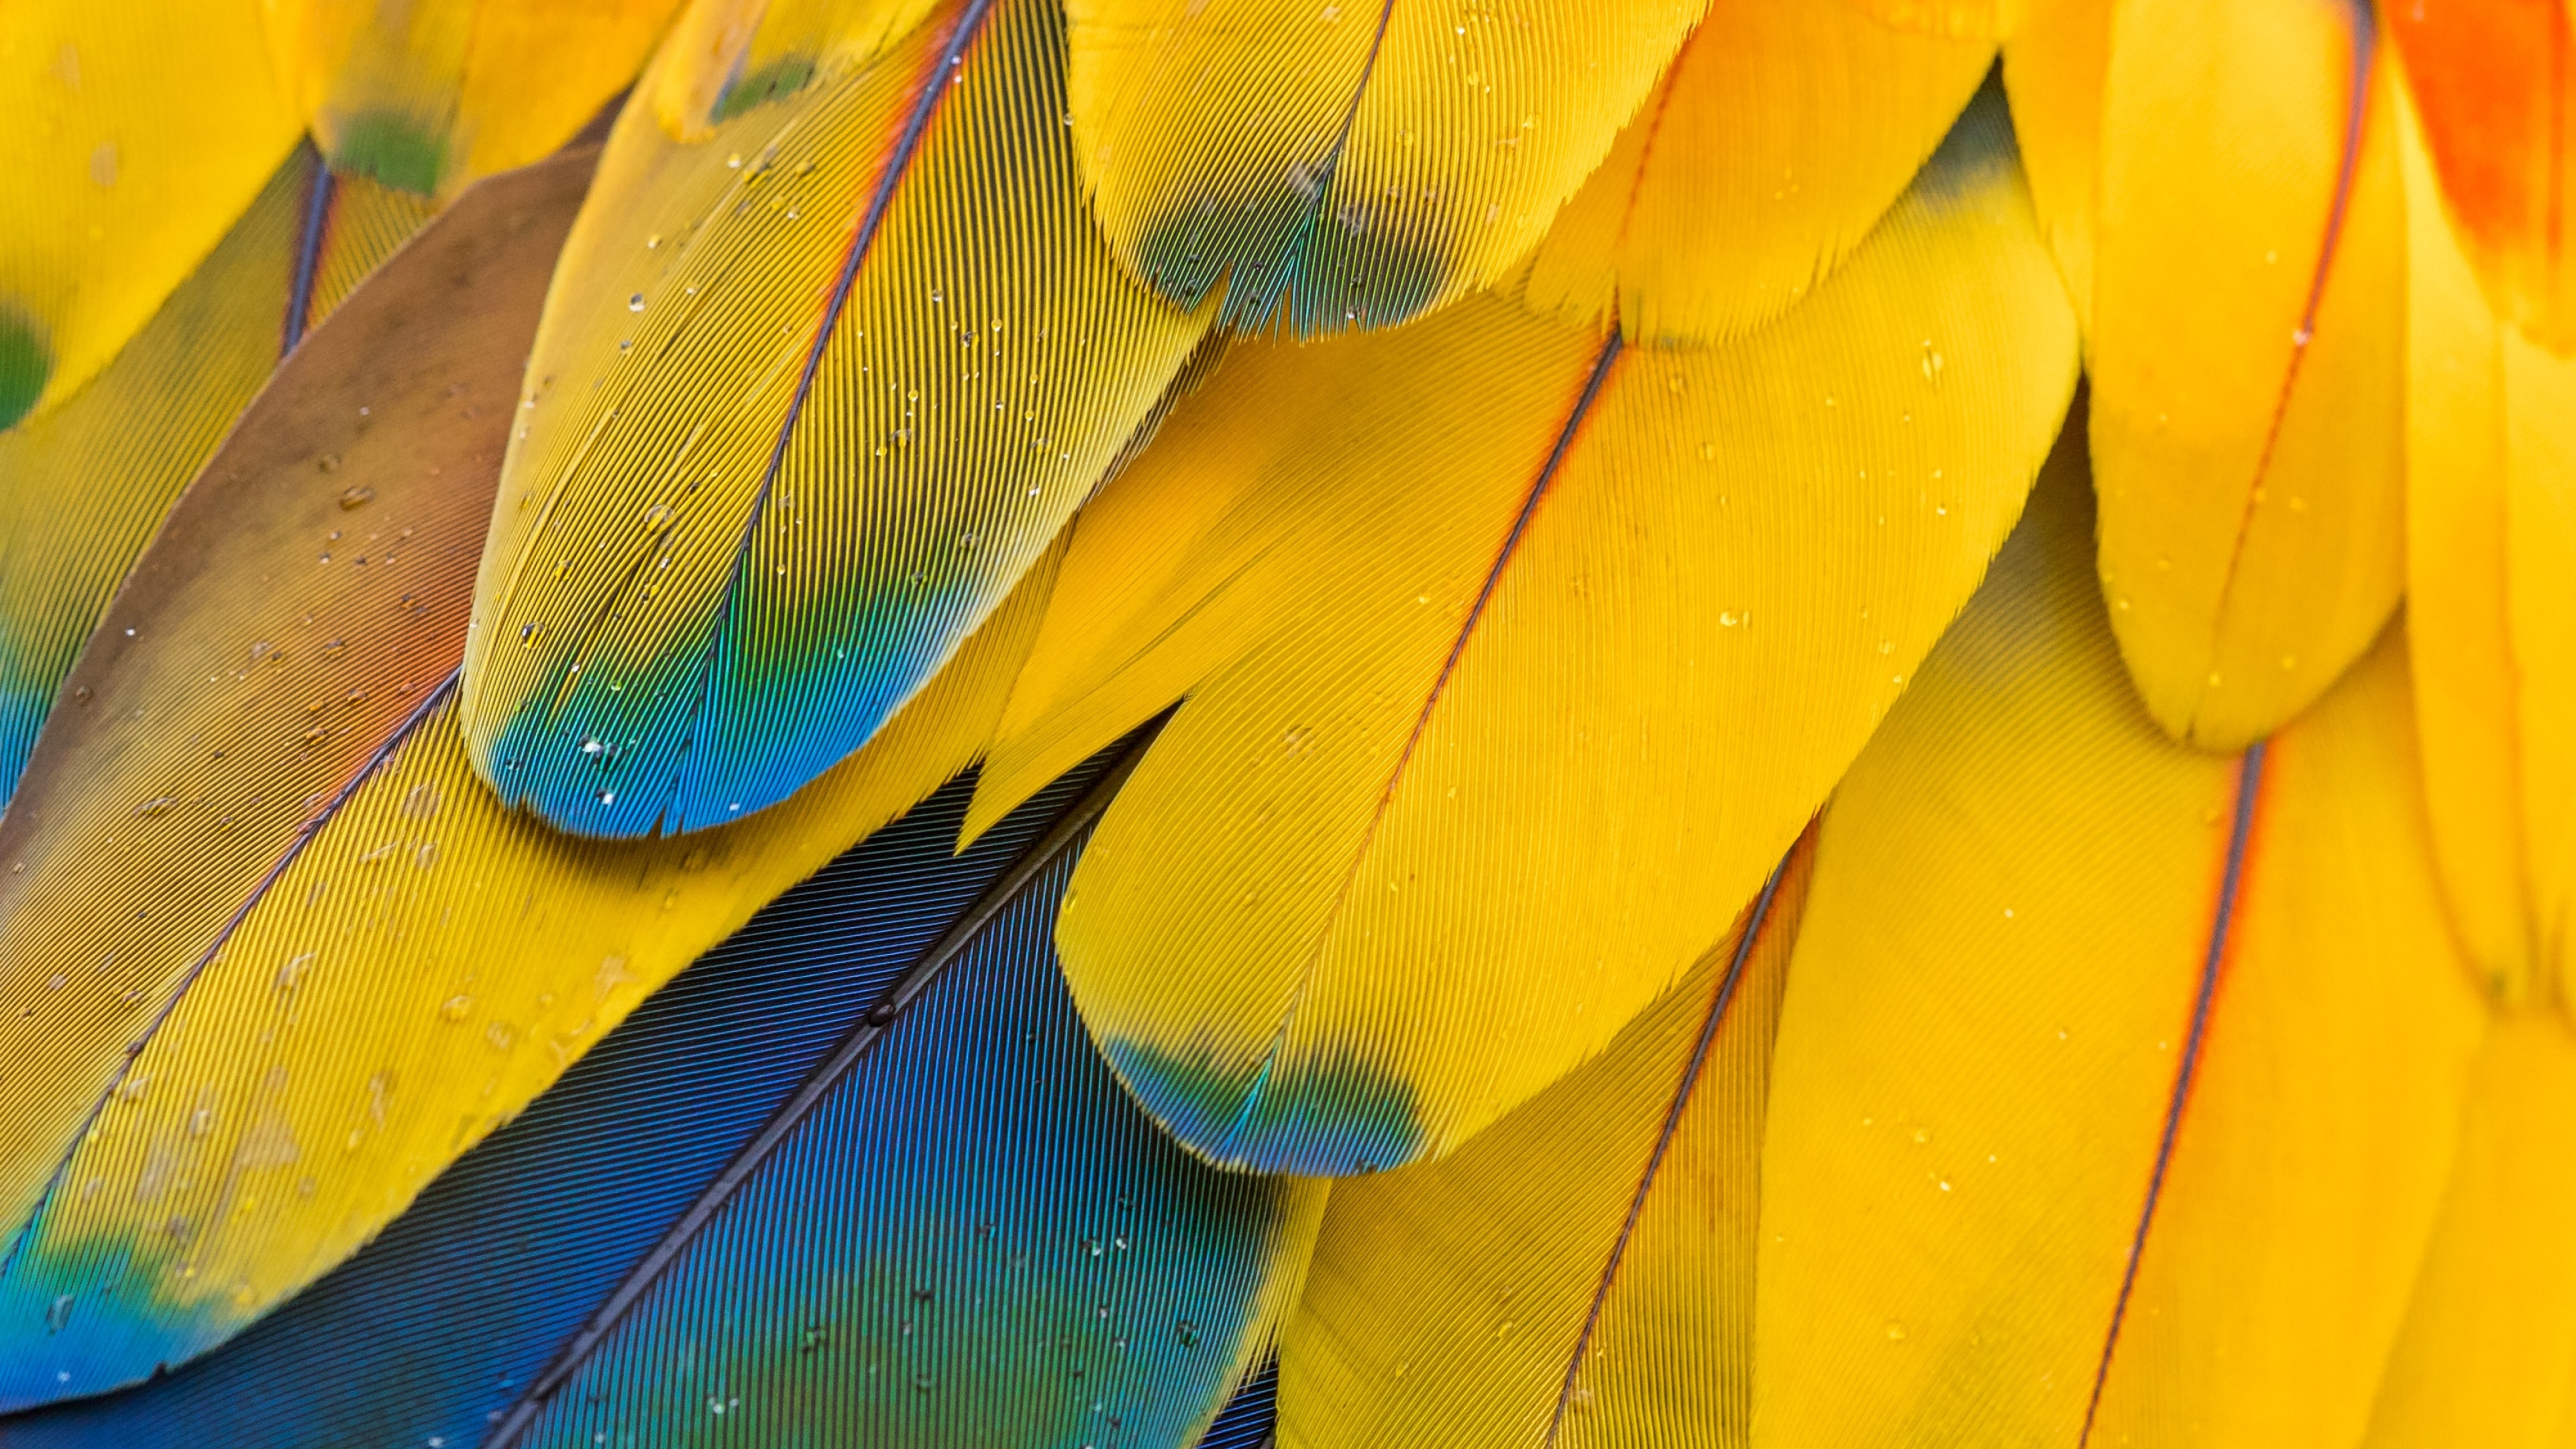 Feather: Macaw's plumage, Multicolor, Colorful. 3840x2160 4K Background.